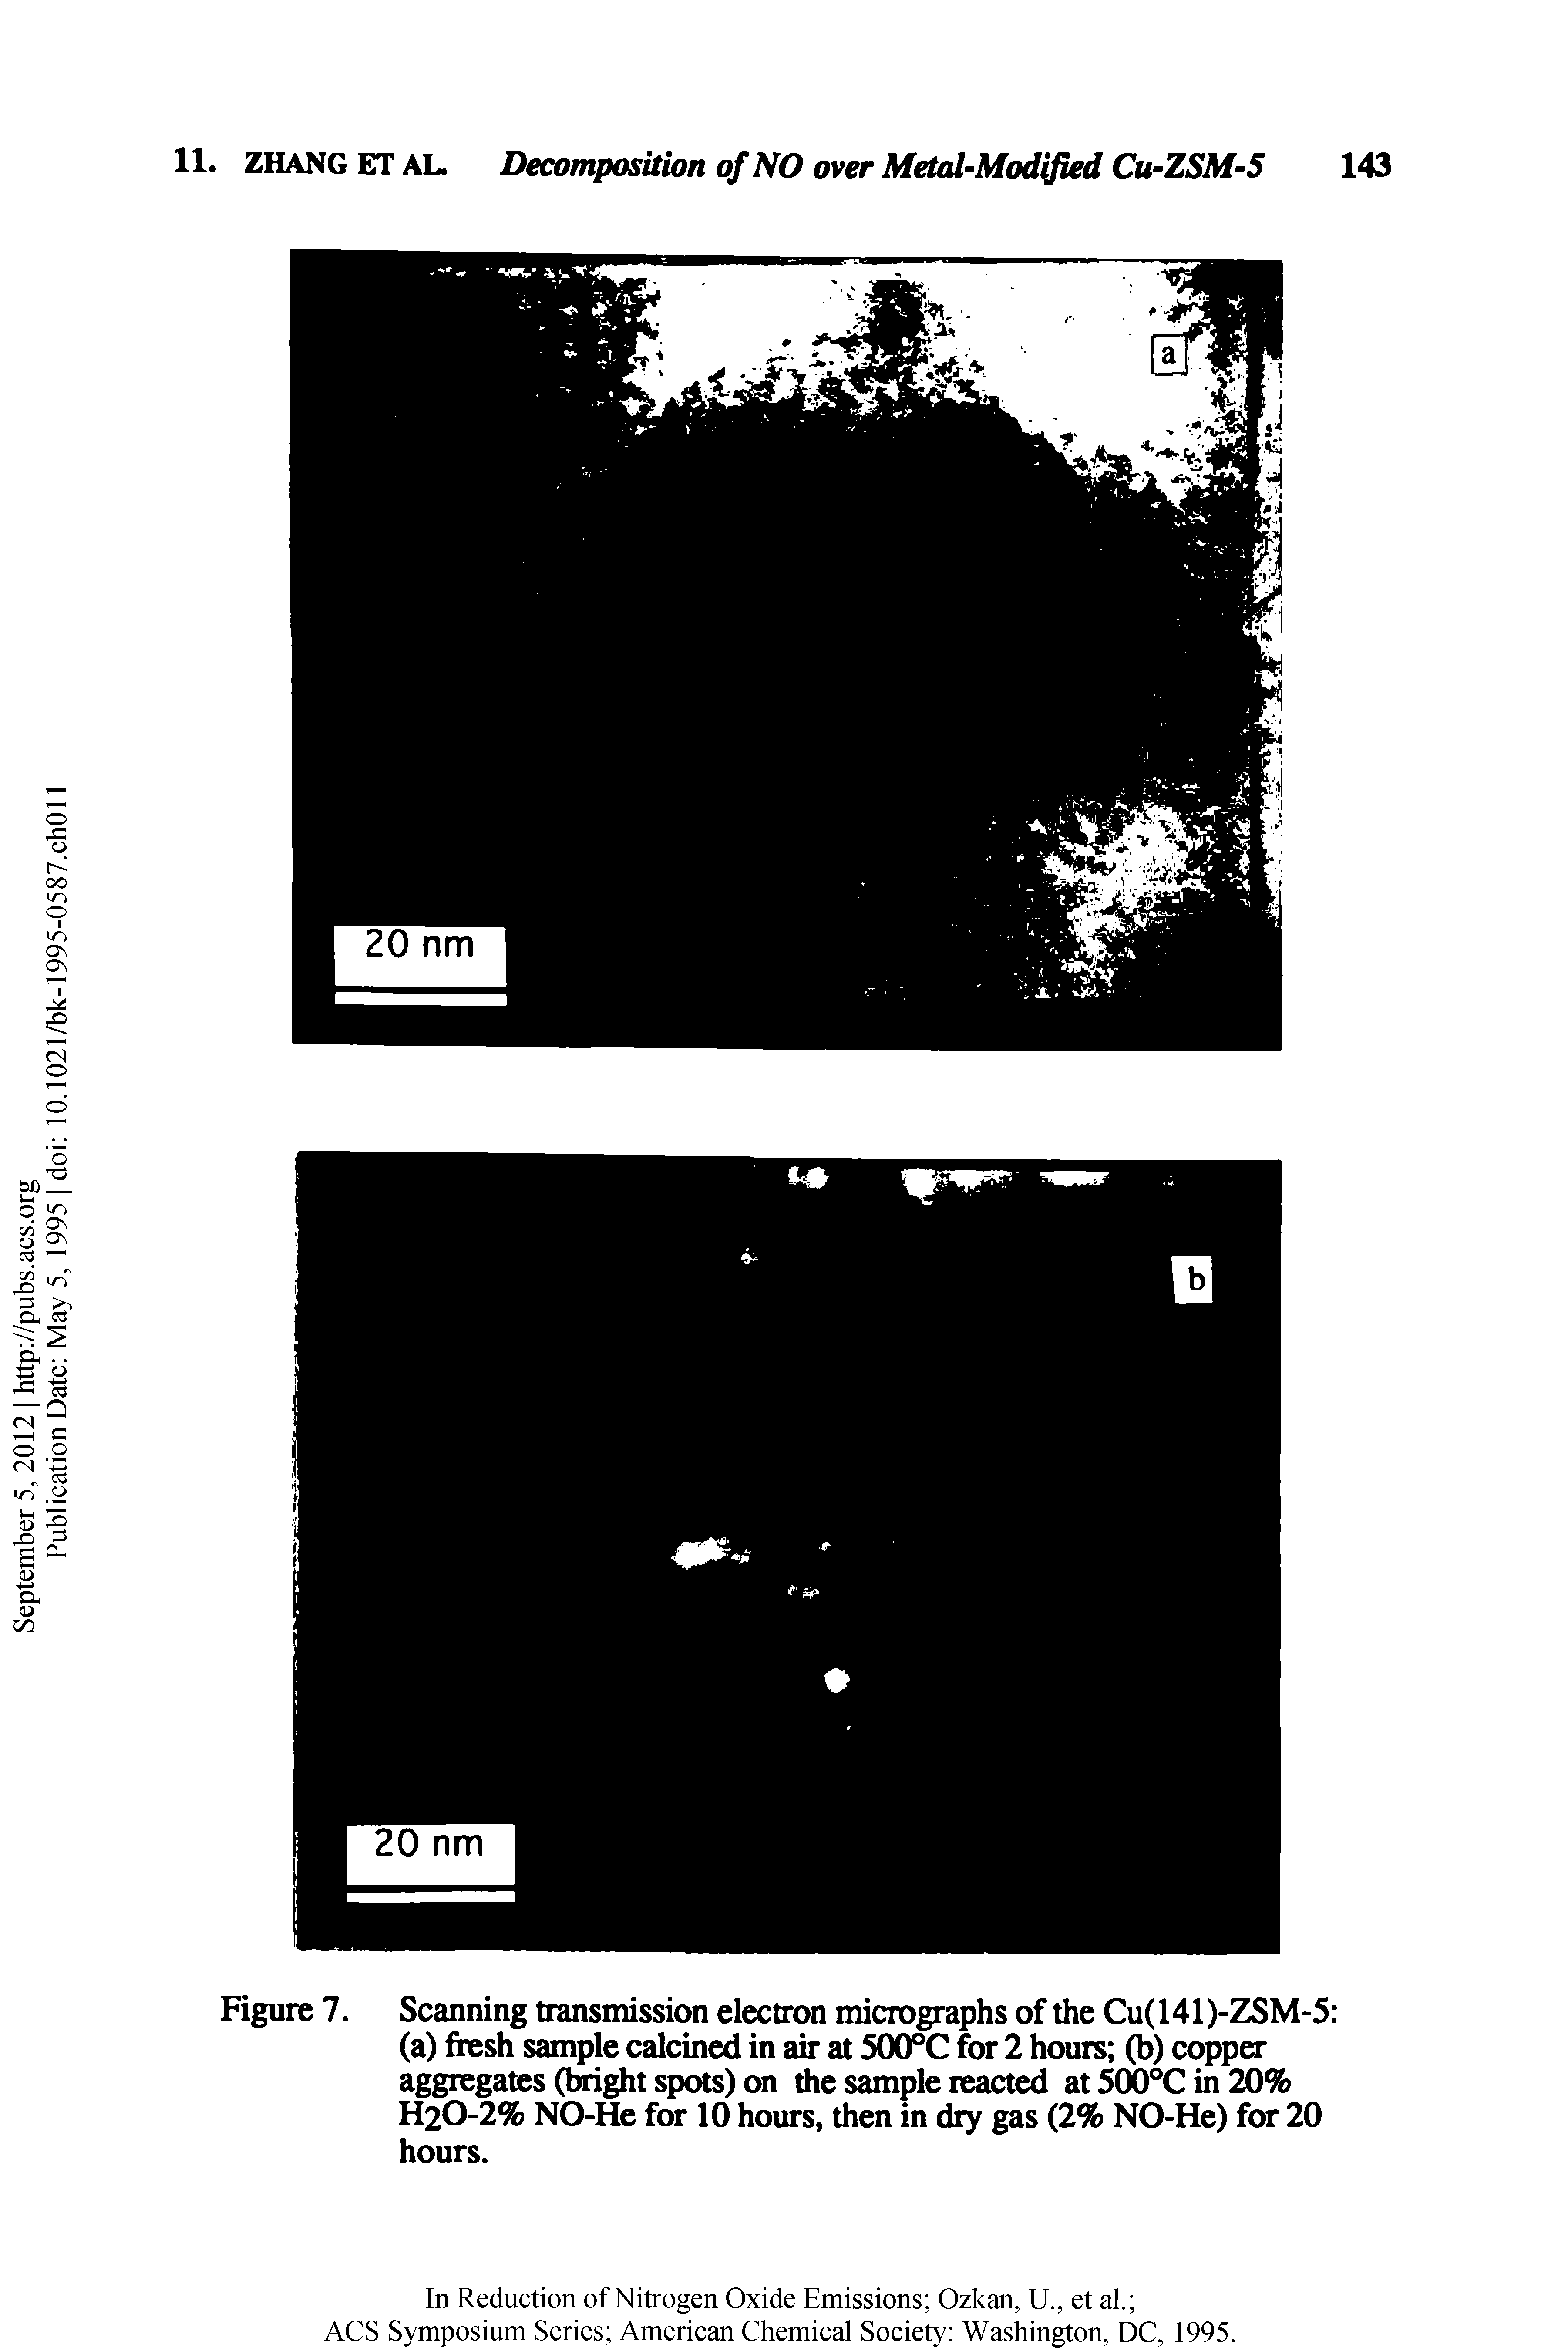 Figure 7. Scanning transmission electron micrographs of the Cu(141)-ZSM-5 (a) fresh sample calcined in air at S00°C for 2 hours (b) copper aggregates (Mght spots) on the sample reacted at 500 C in 20% H20-2% NO-He for 10 hours, then in dry gas (2% NO-He) for 20 hours.